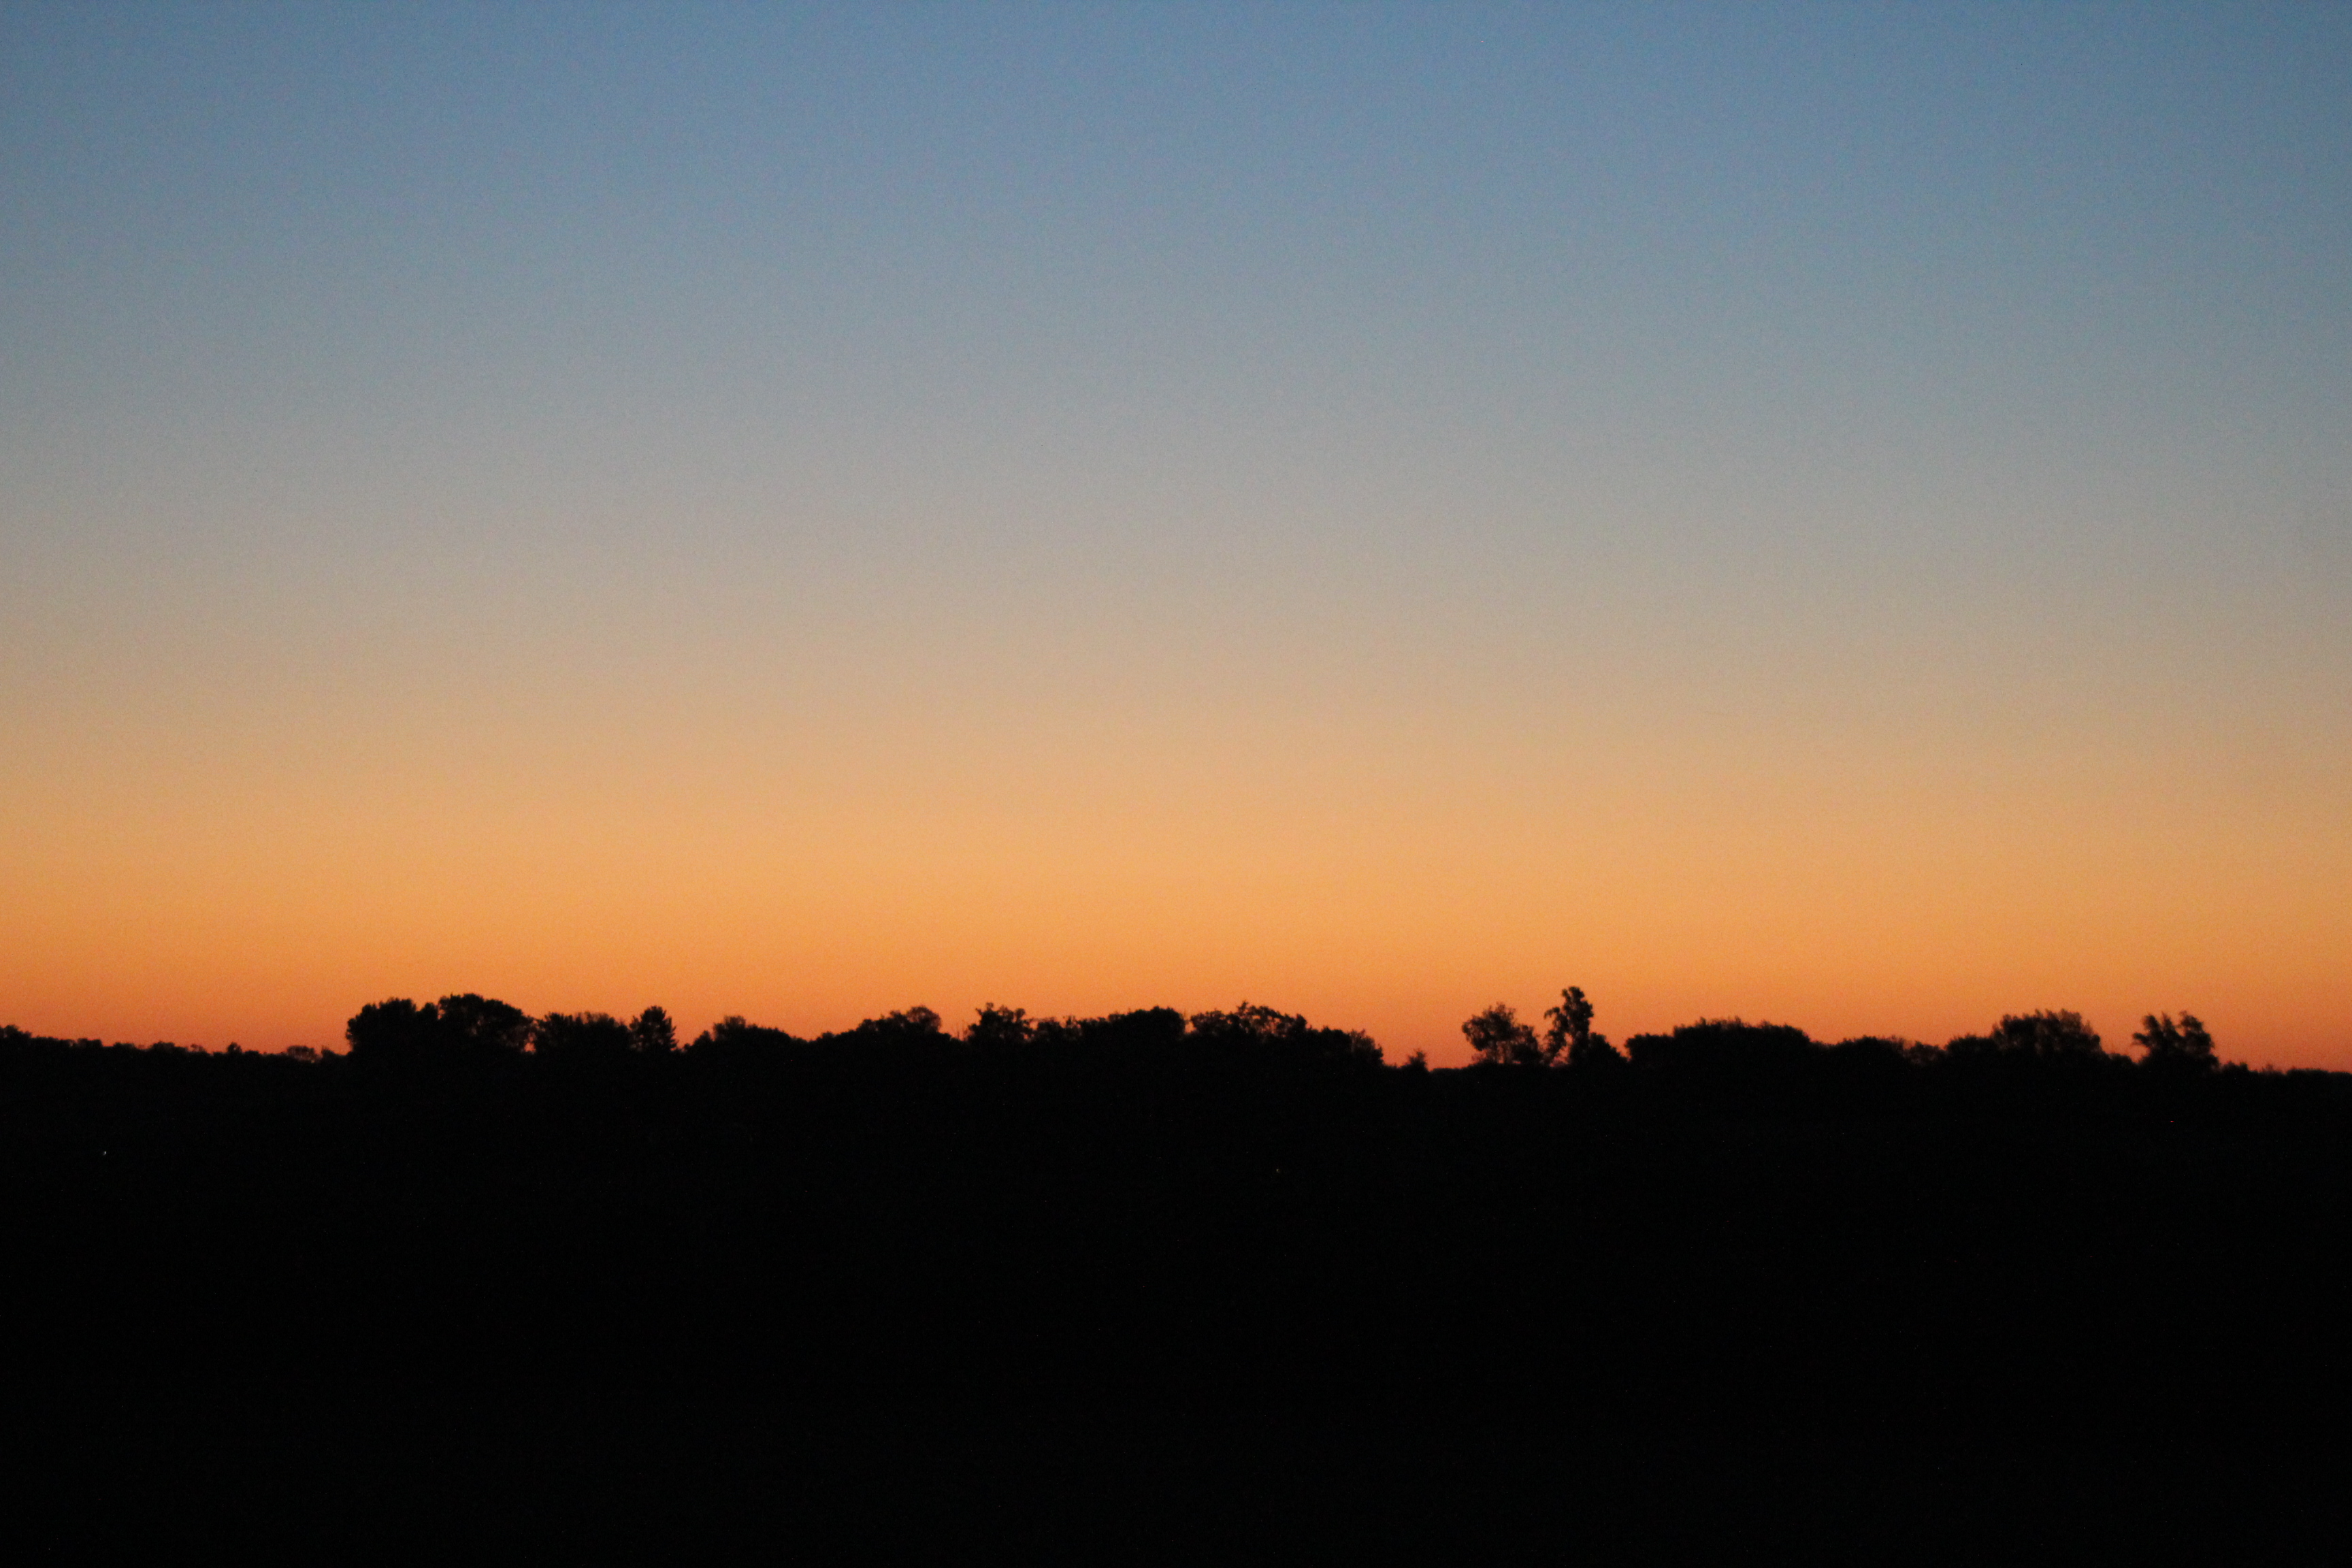 Prairie Sunrise. Bands of orange, yellow, green and blue fade to gray from the horizon; trees in the near distance stand in silhouette against a brightening sky.